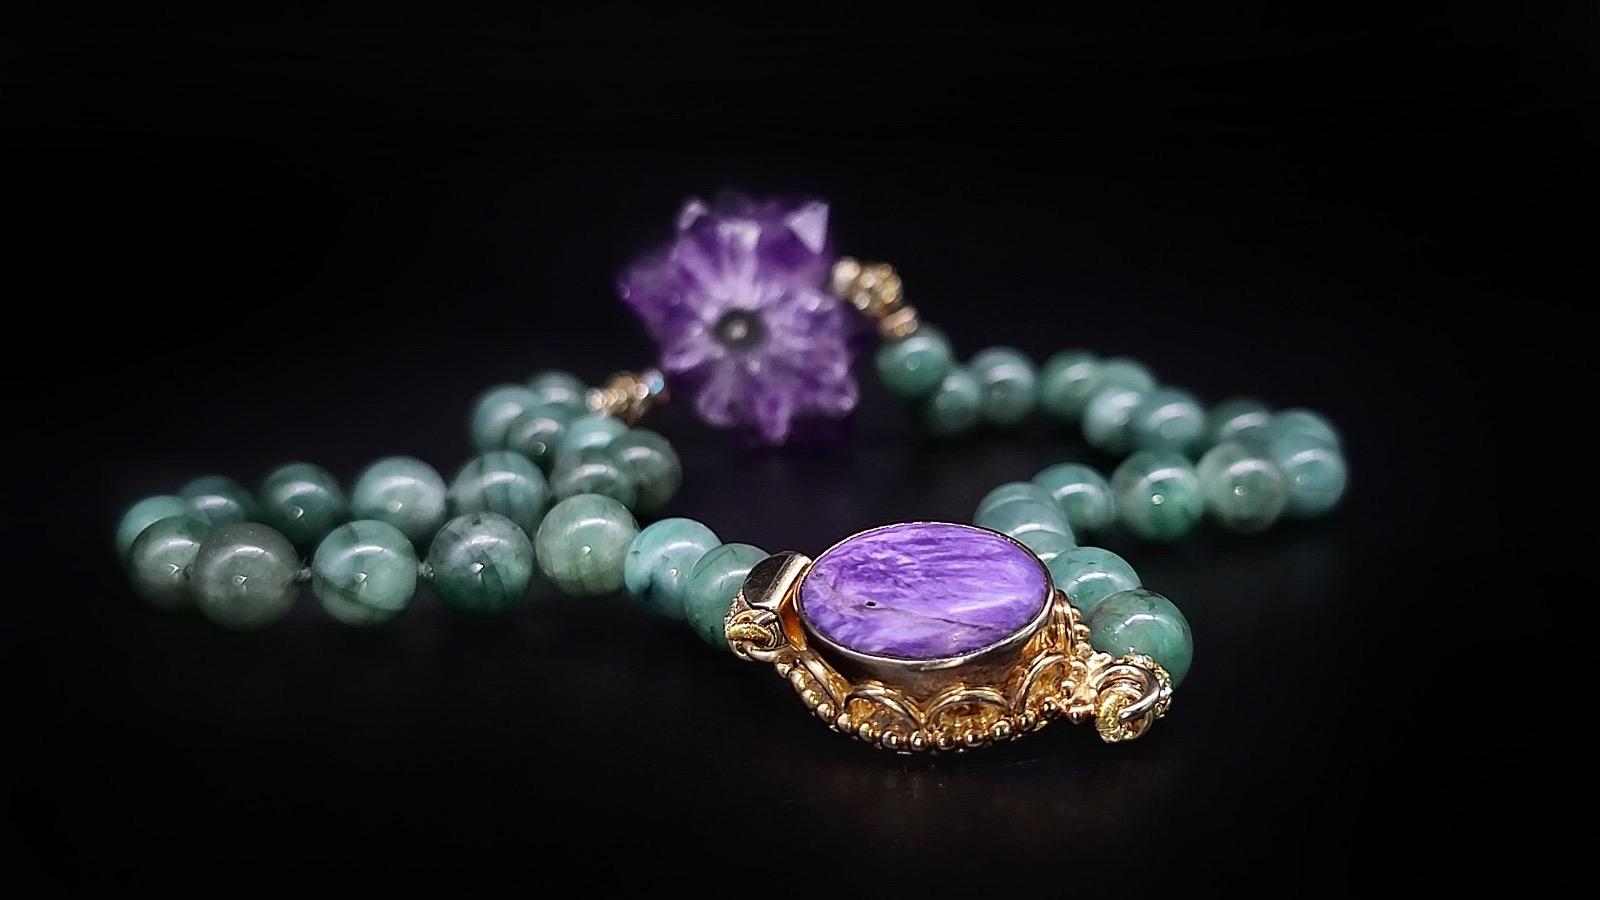 Bead A.Jeschel Emerald with Amethyst  stalactite sliced pendant necklace . For Sale